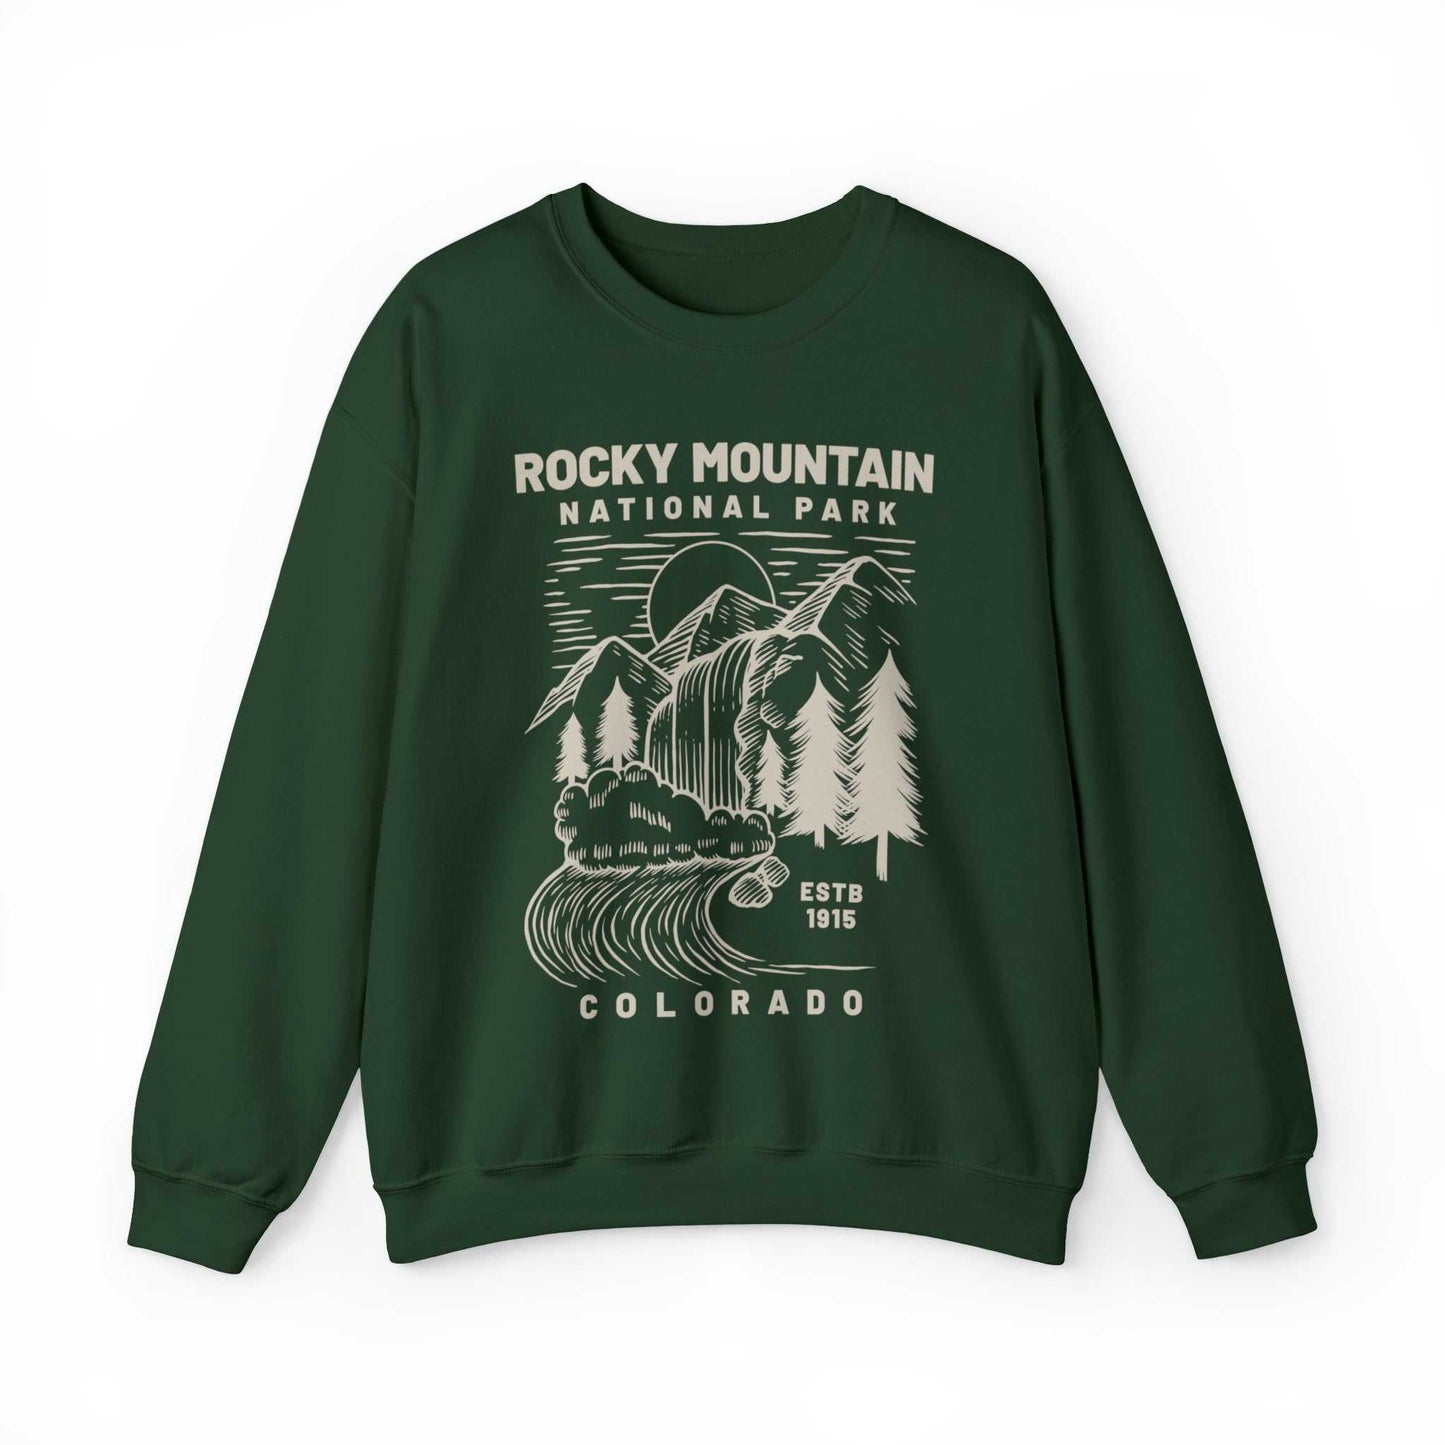 Rocky Mountain National Park SweatshirtBring the beauty of Rocky Mountain National Park of Colorado into your wardrobe with this simple waterfall and mountain landscape cozy and comfy crewneck sweatshirt 